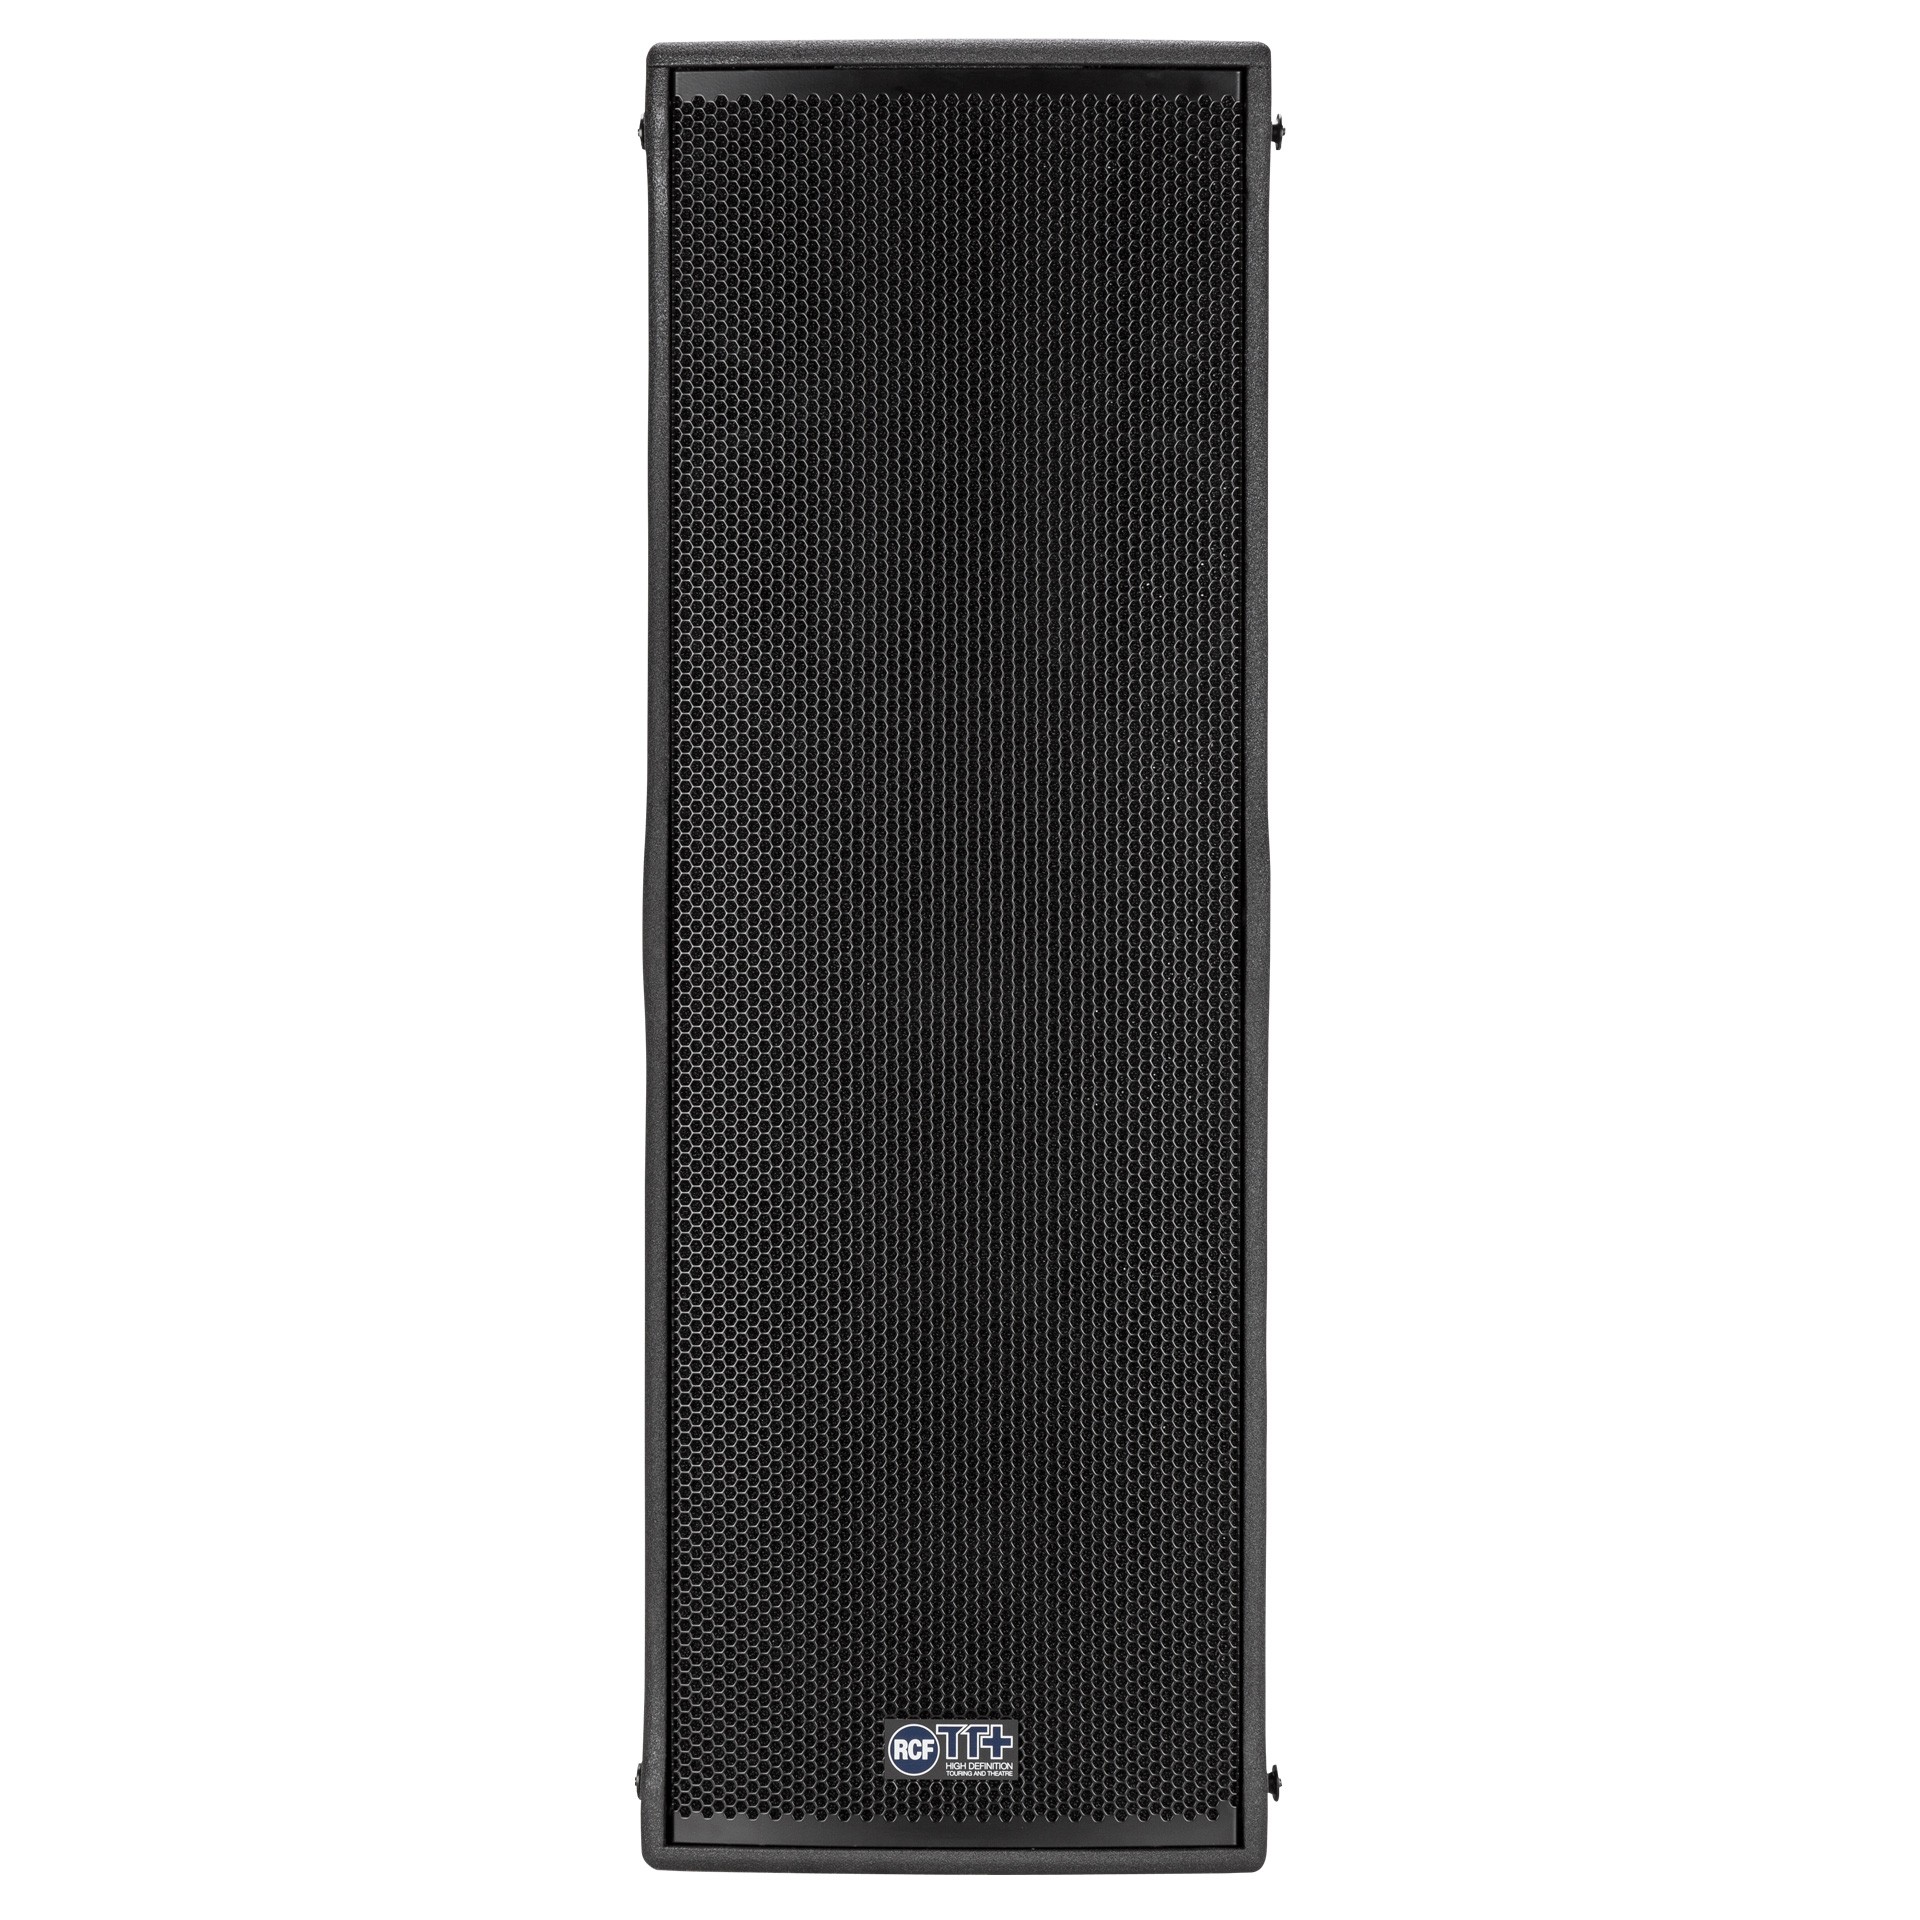 Subwoofere pro - Subwoofer activ RCF TTL 6-AS, audioclub.ro